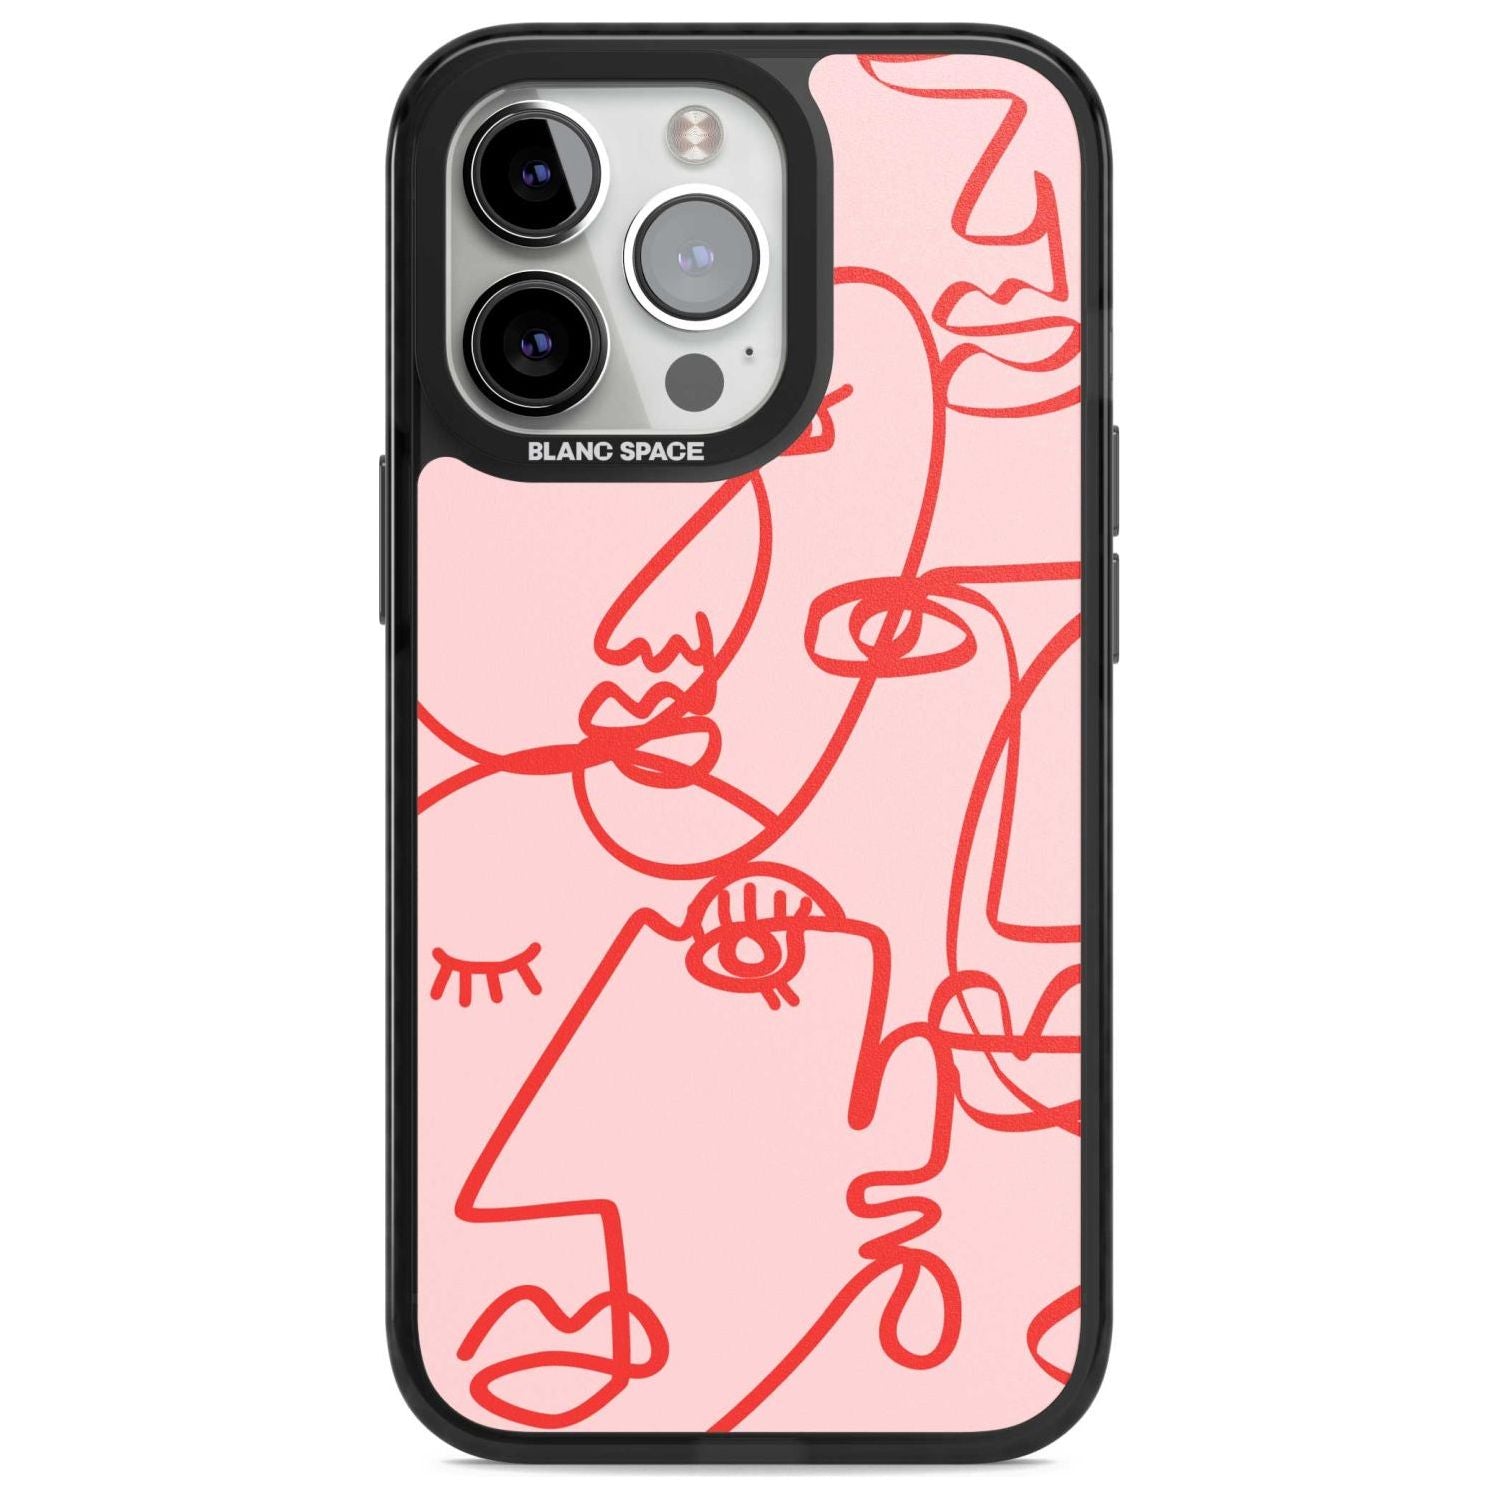 Abstract Continuous Line Faces Red on Pink Phone Case iPhone 15 Pro Max / Magsafe Black Impact Case,iPhone 15 Pro / Magsafe Black Impact Case,iPhone 14 Pro Max / Magsafe Black Impact Case,iPhone 14 Pro / Magsafe Black Impact Case,iPhone 13 Pro / Magsafe Black Impact Case Blanc Space